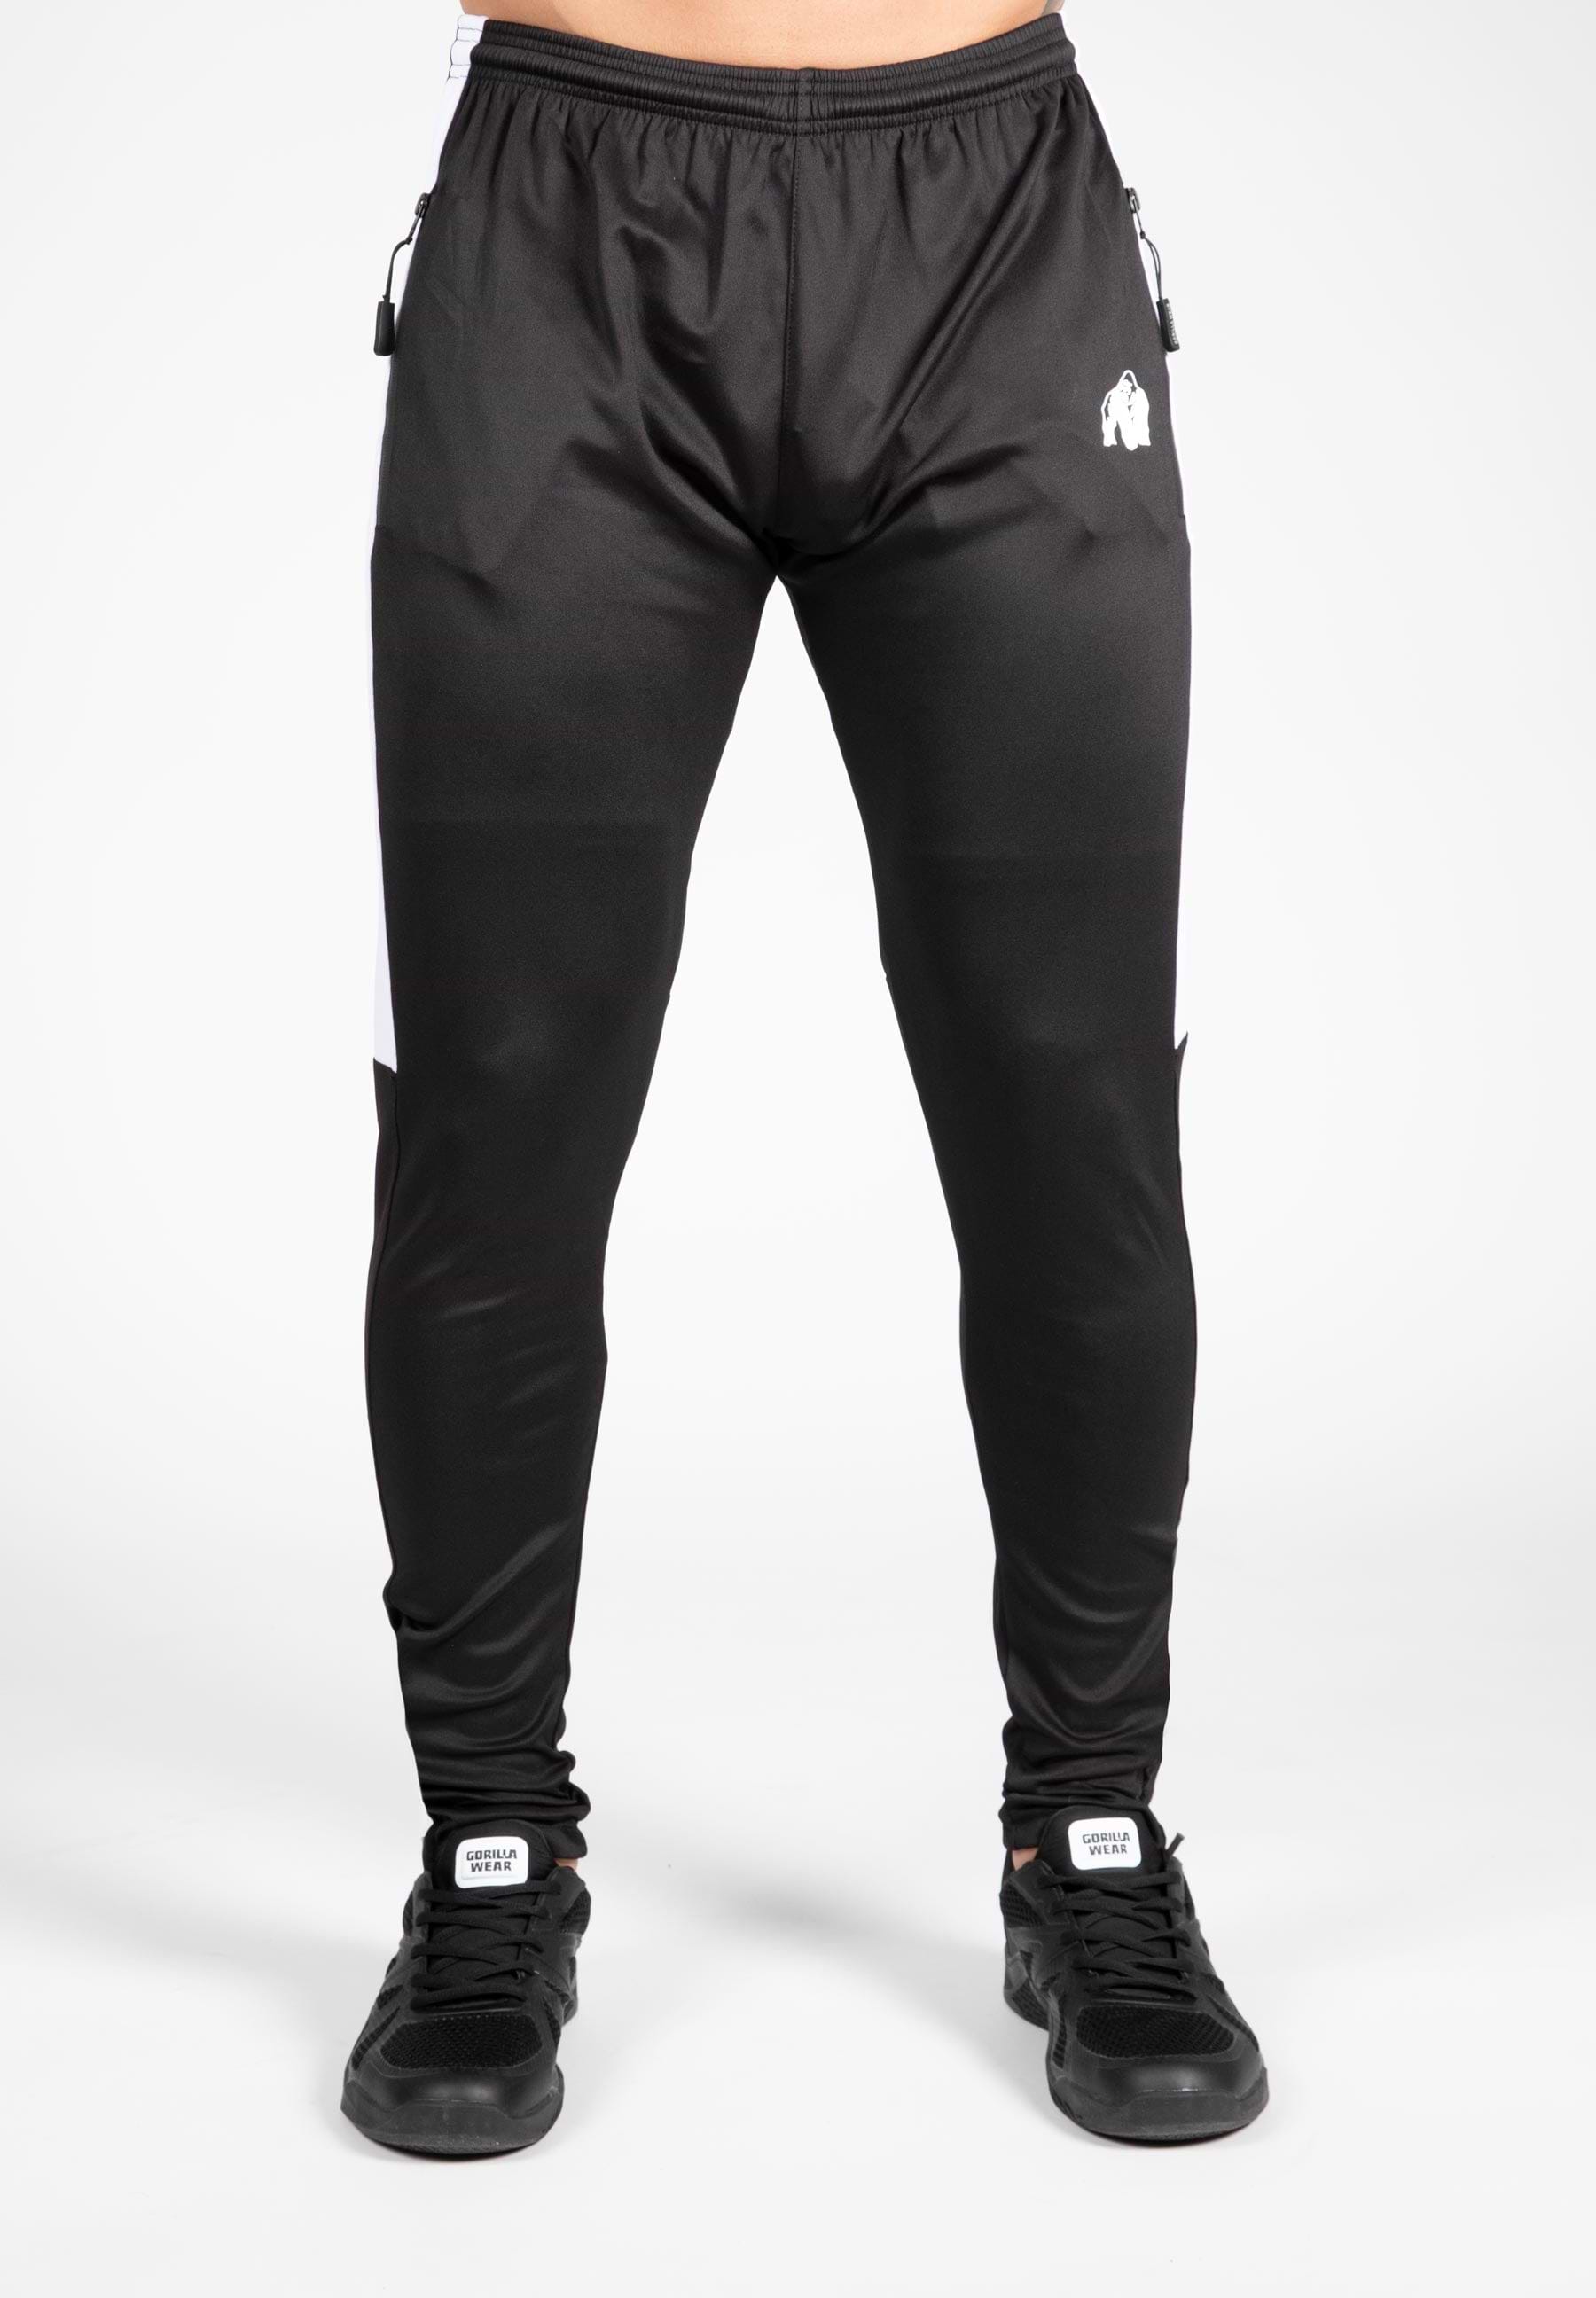 Buy Mens Track Pants with Zipper Pockets Online at GIYSI